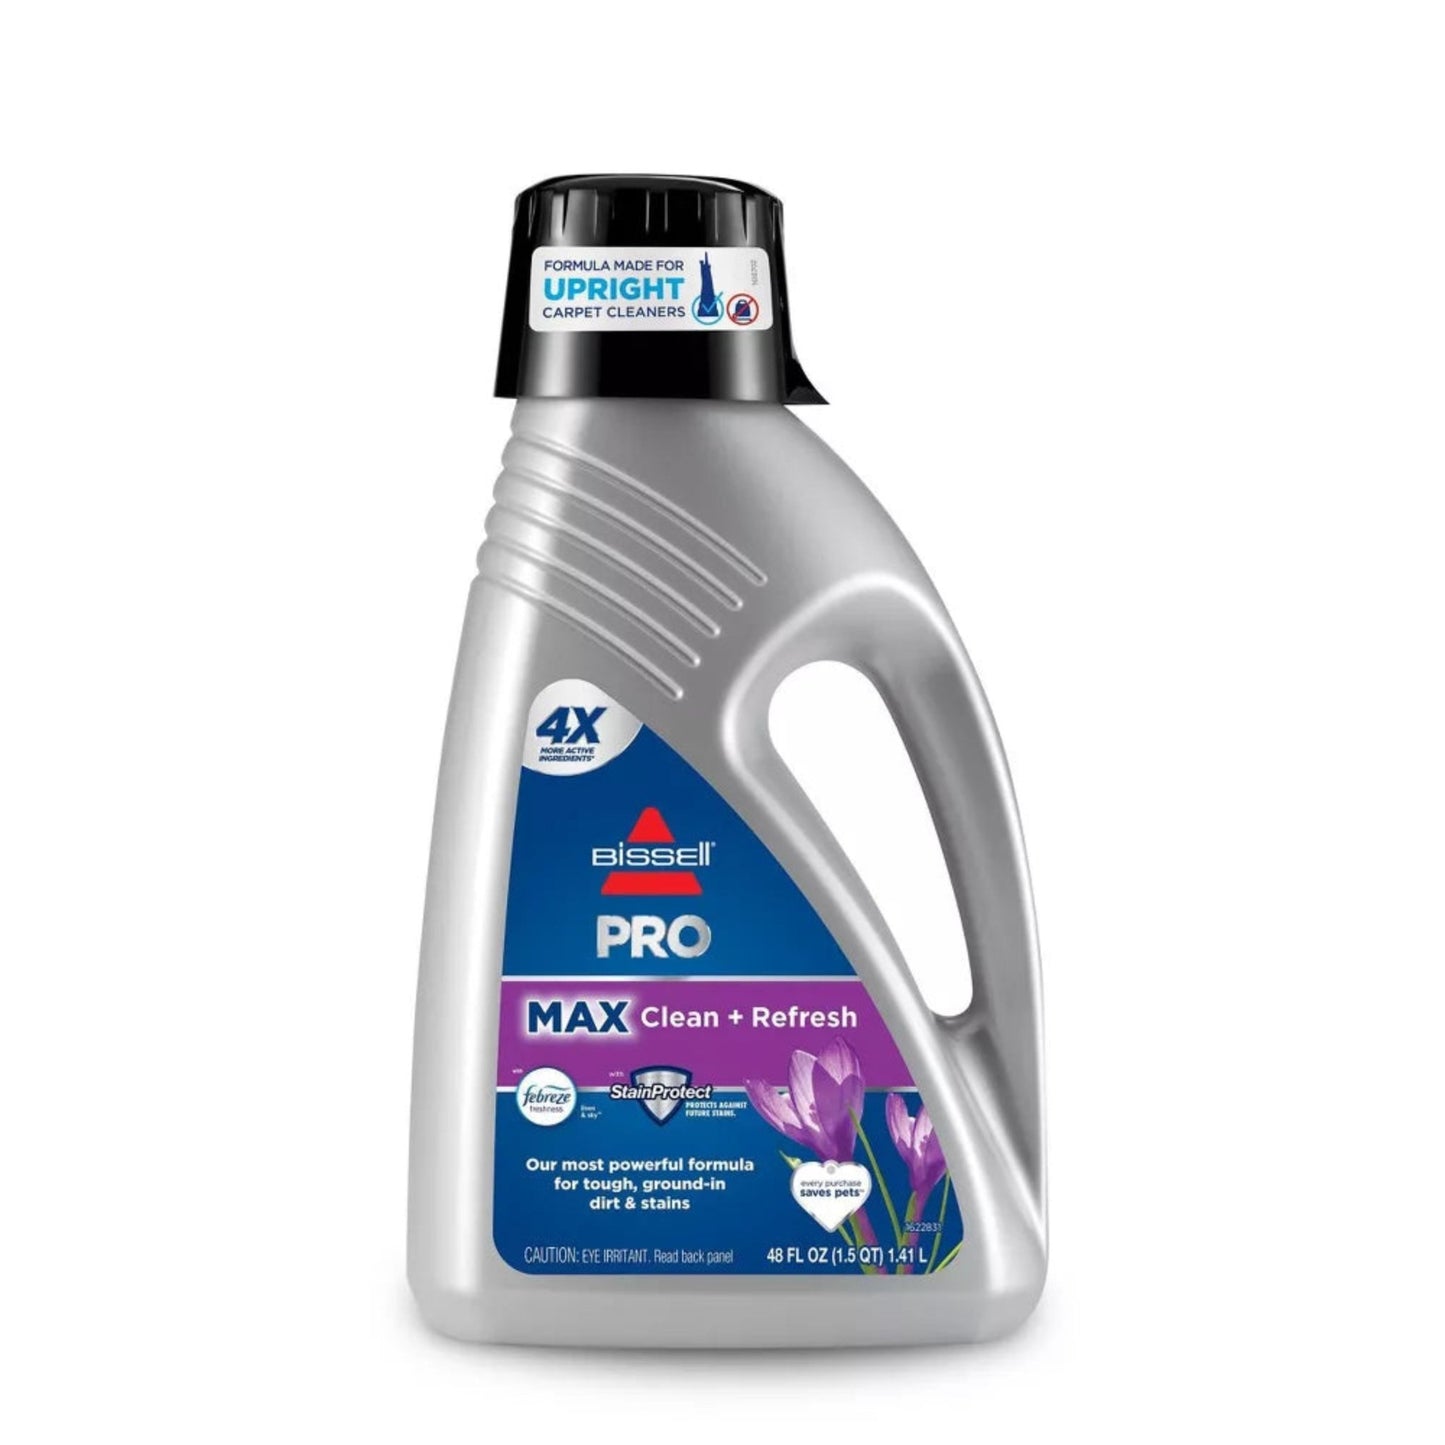 BISSELL-BISSELL 1.41L Professional Cleaning Formula with Febreze - Brandat Outlet